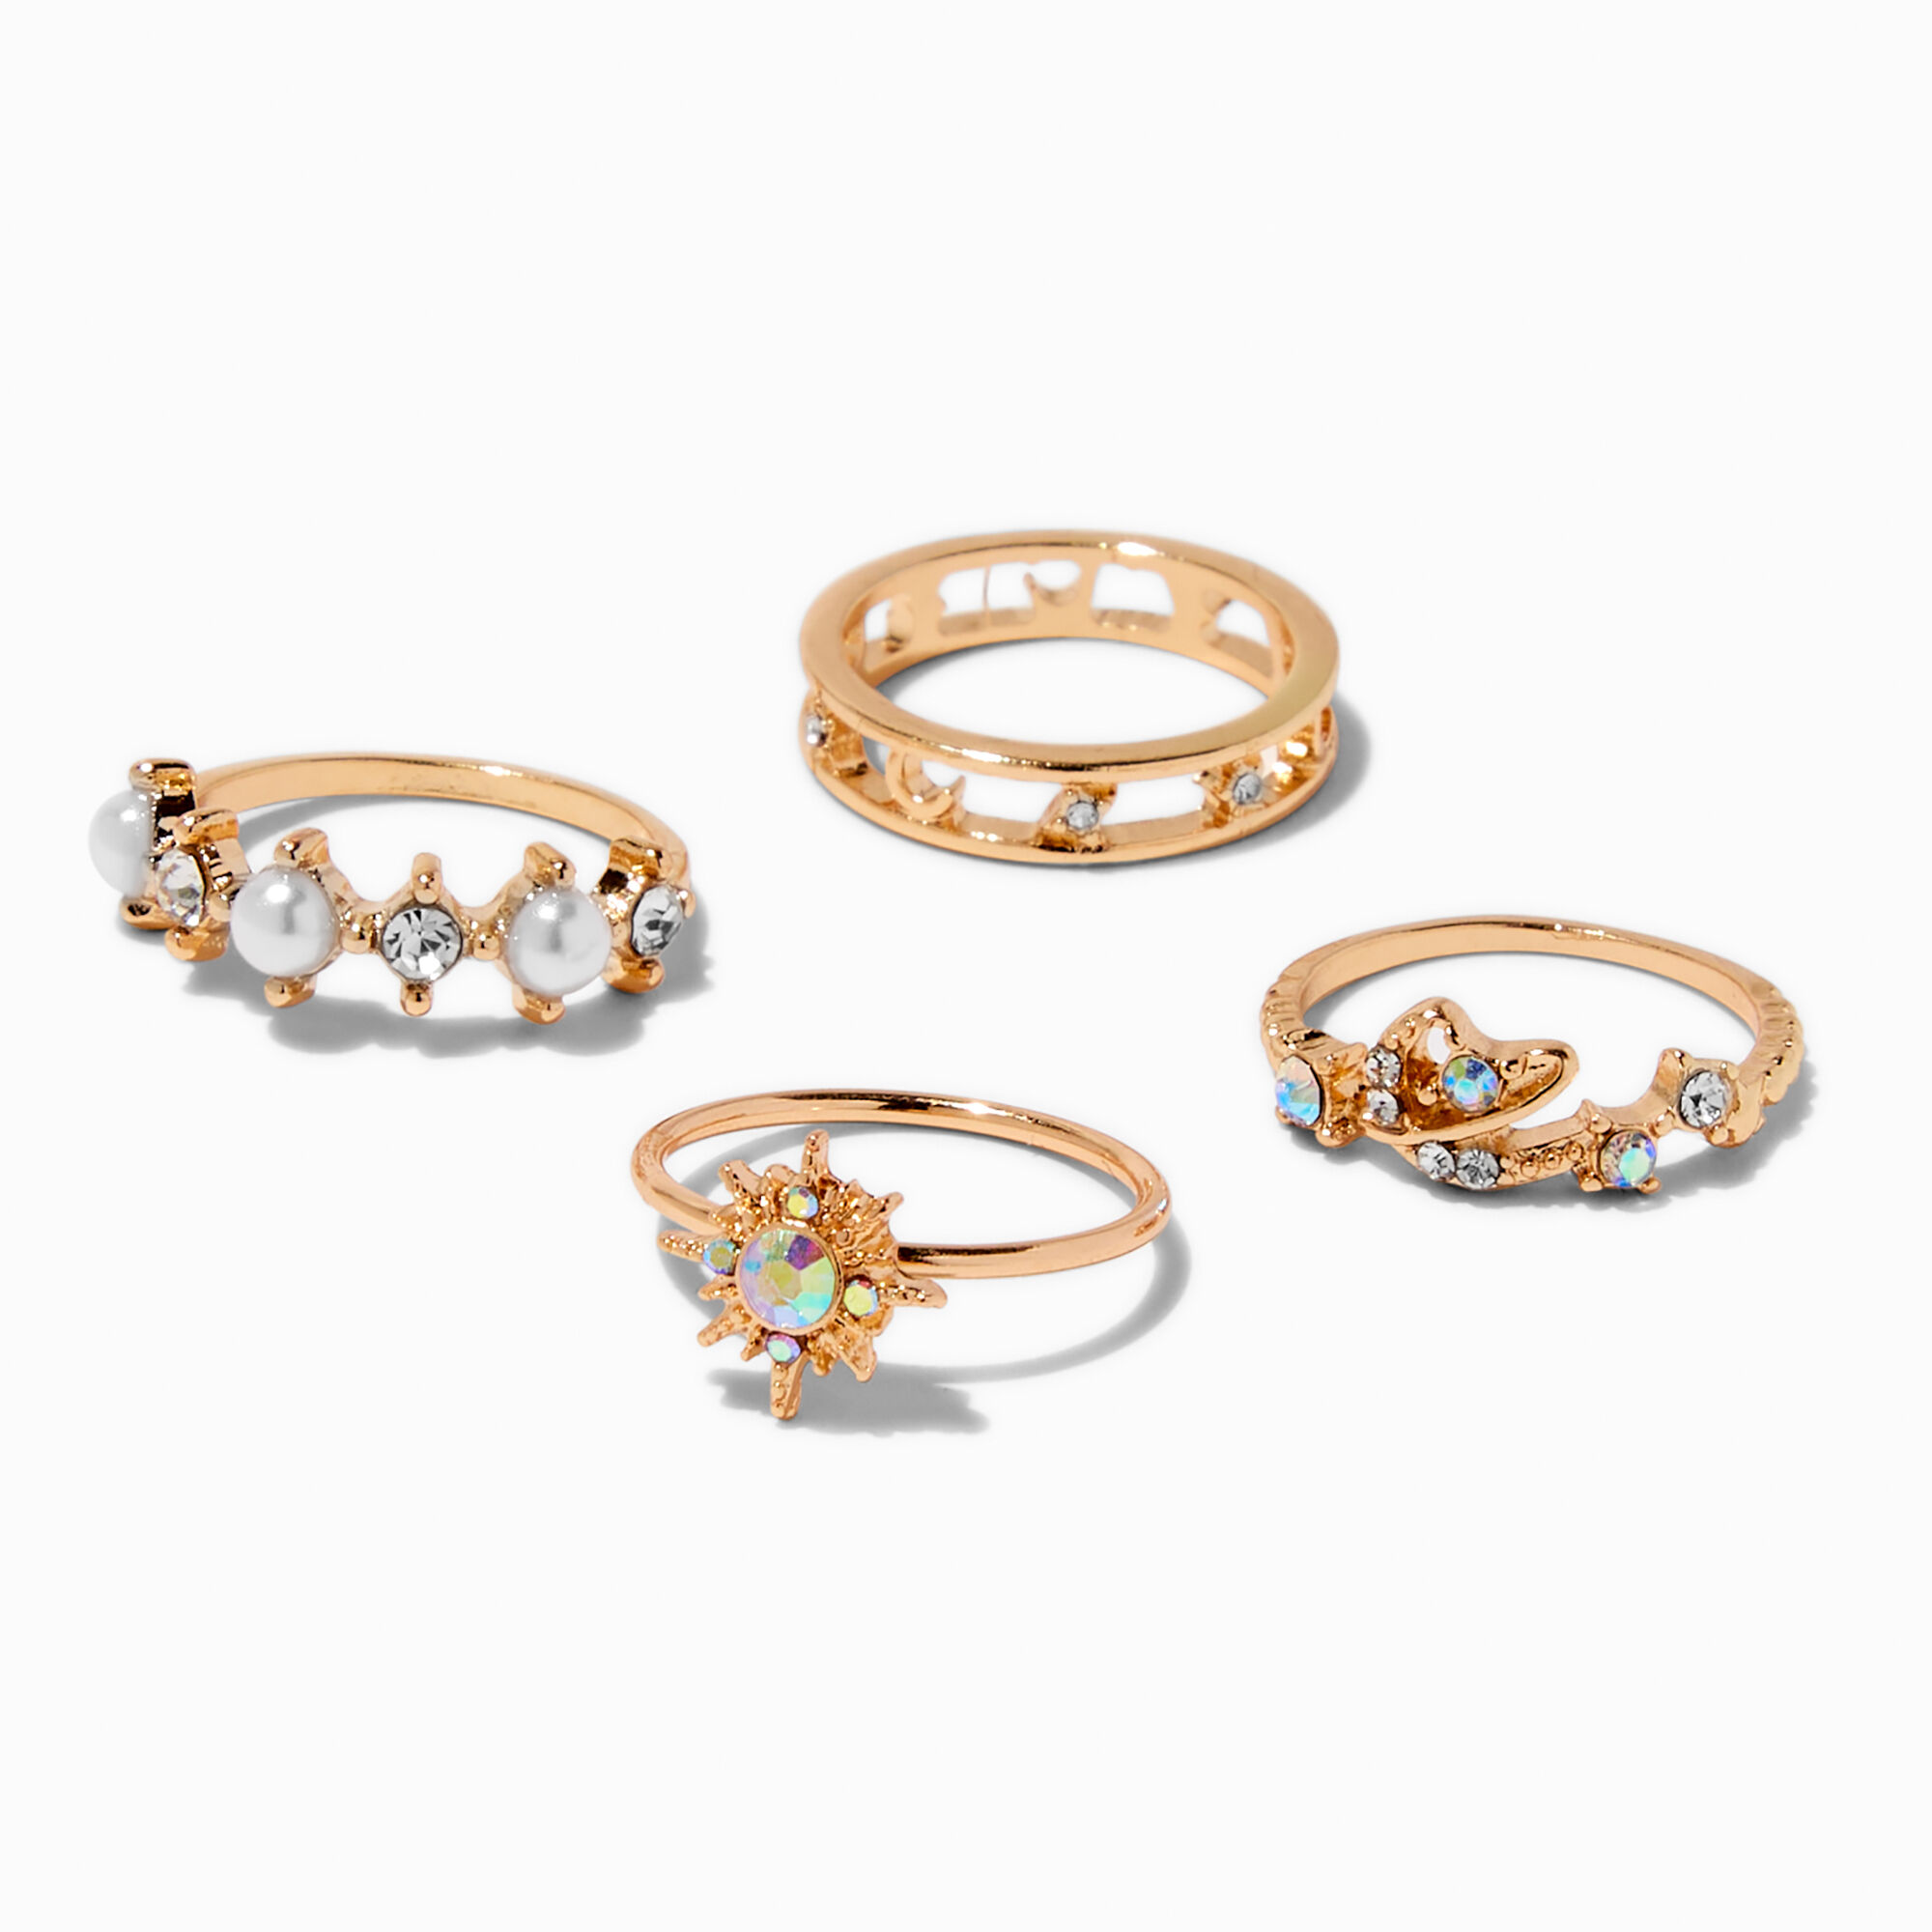 View Claires Tone Iridescent Celestial Ring Set 4 Pack Gold information